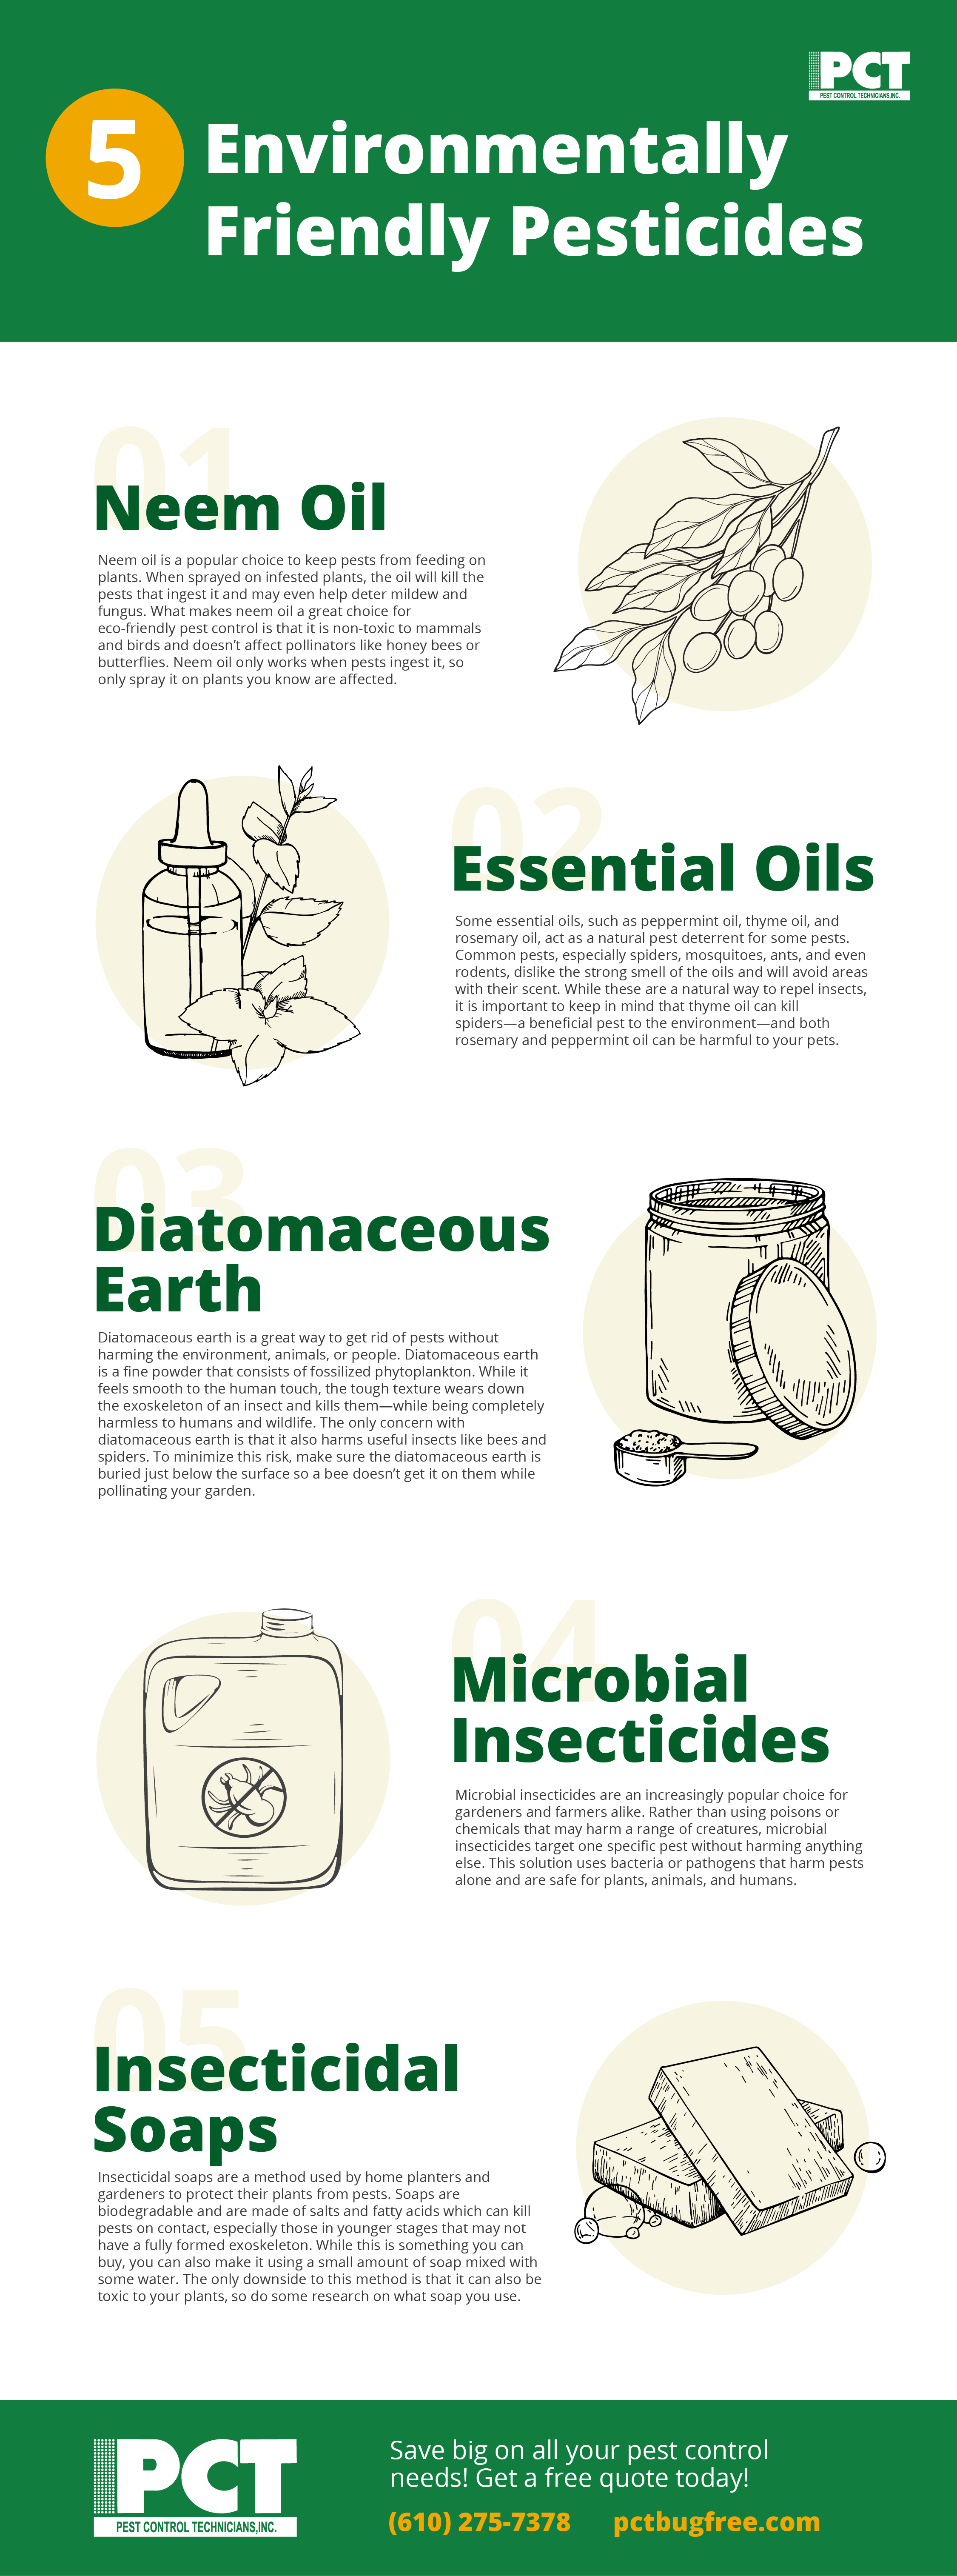 Infographic of eco-friendly pesticides which name the following 5 options: neem oil, essential oils, diatomaceous earth, microbial insecticides, and insecticidal soaps